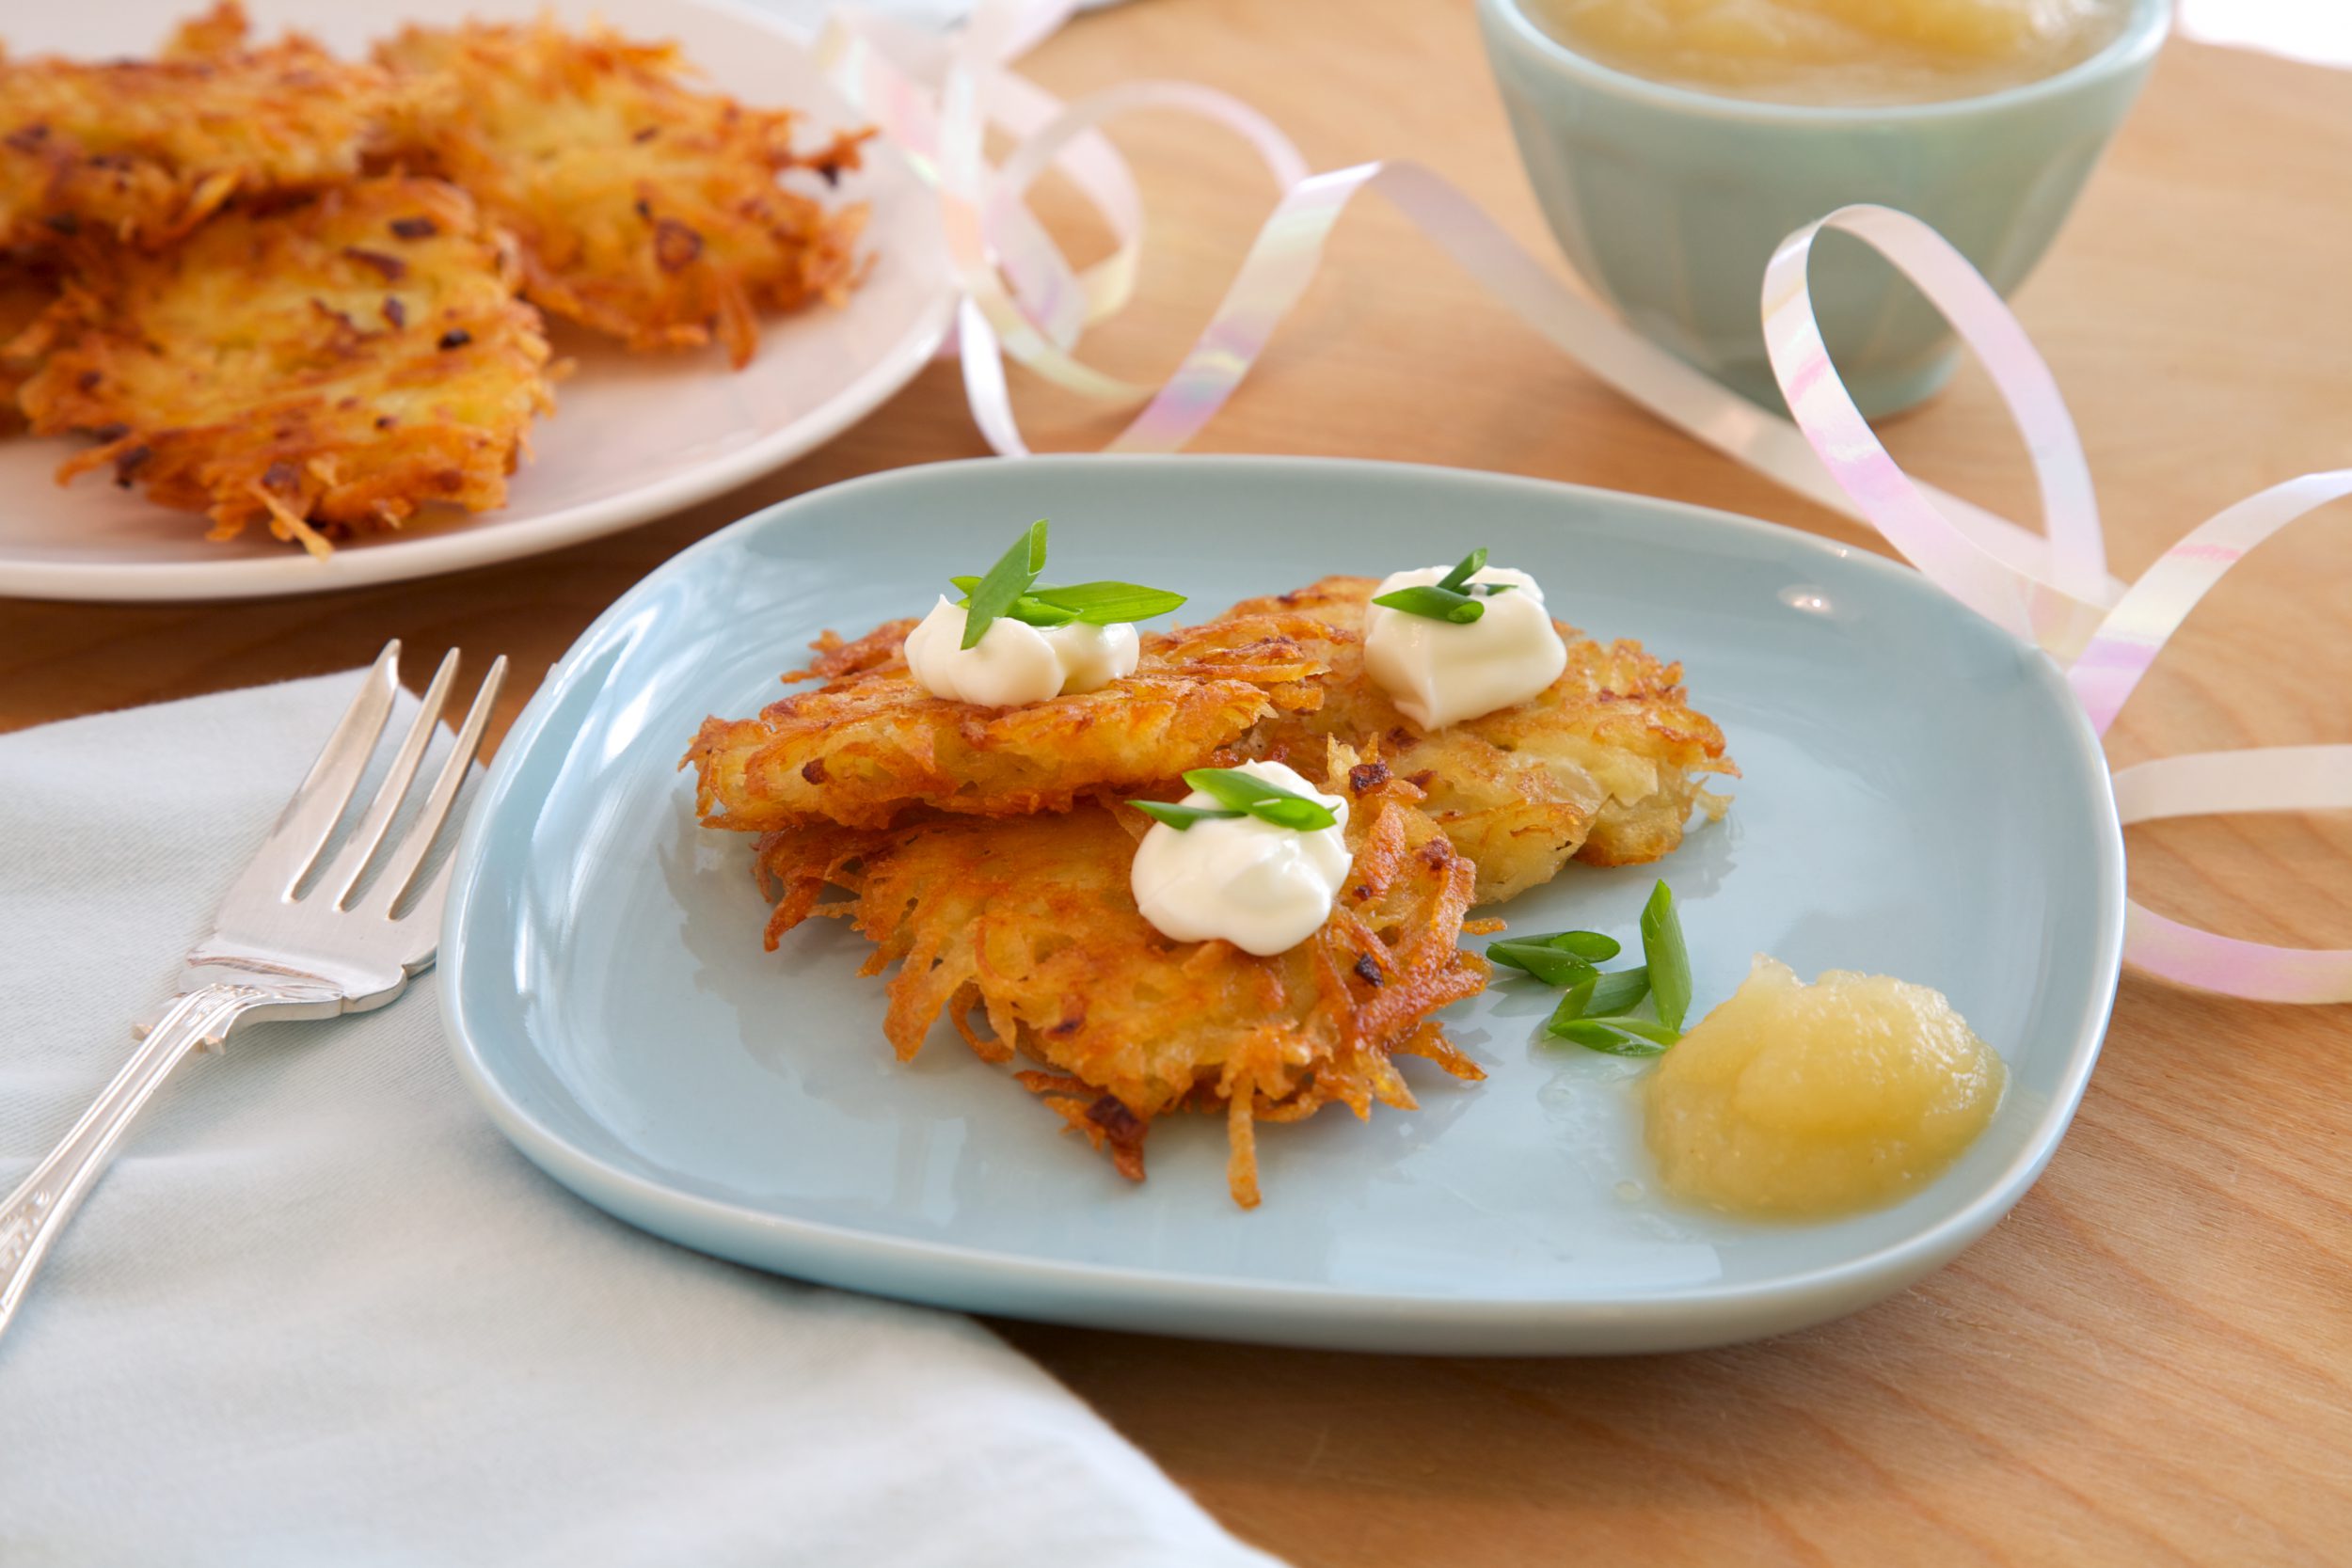 Potato and Parsnip Cakes with Two Sauces